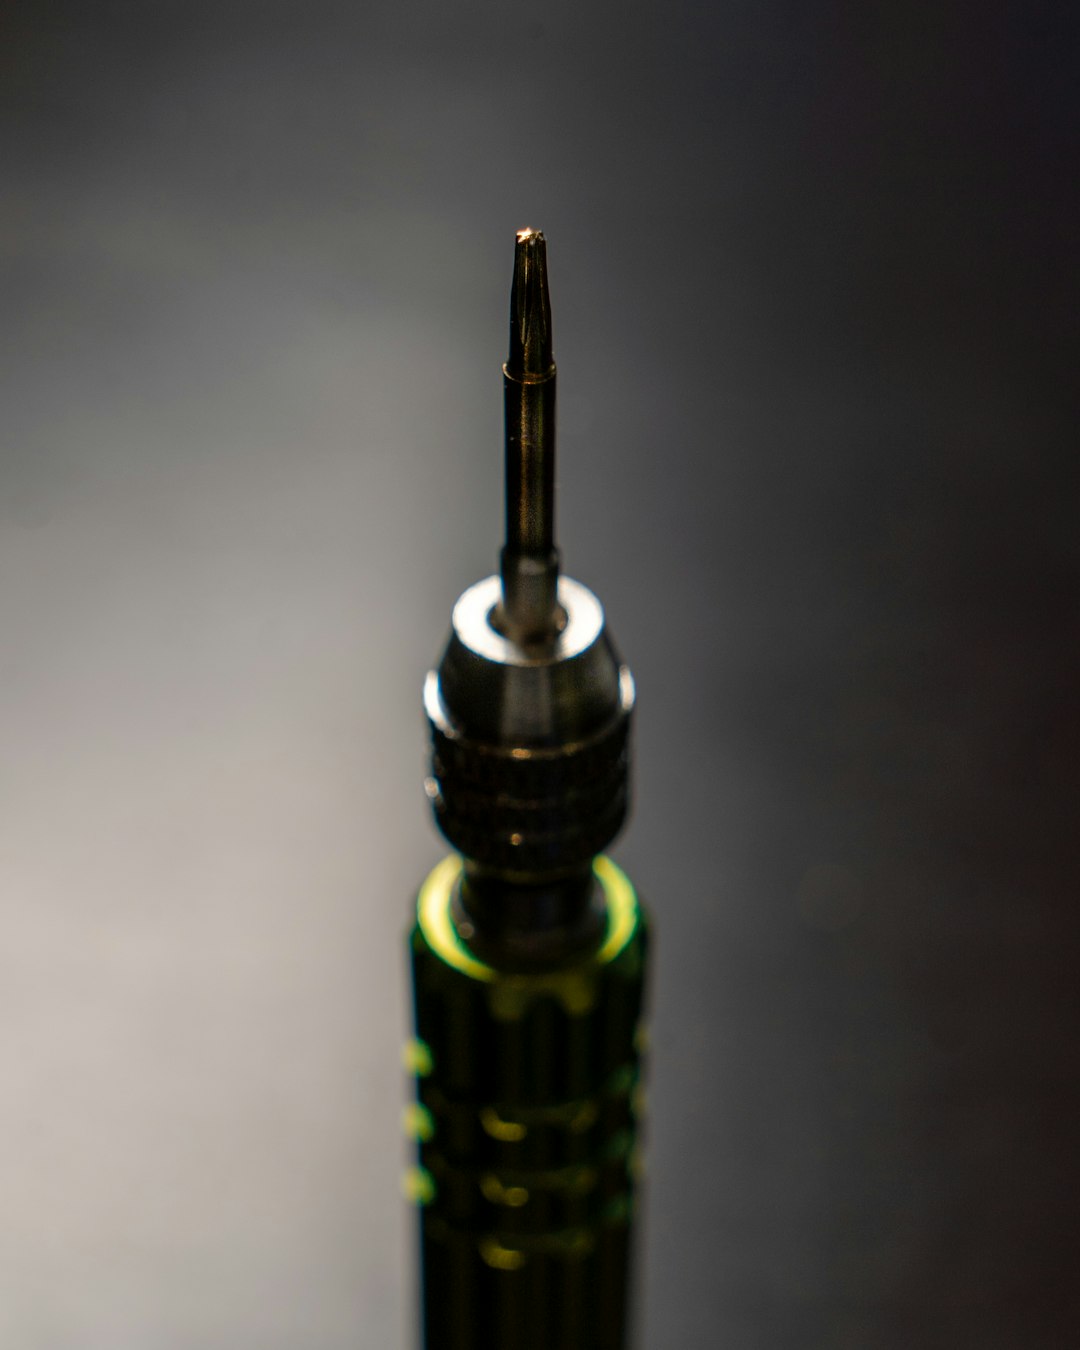 A torx screwdriver, as often used in electronics repairs. Found in every iPhone, iPad, Macbook, ...